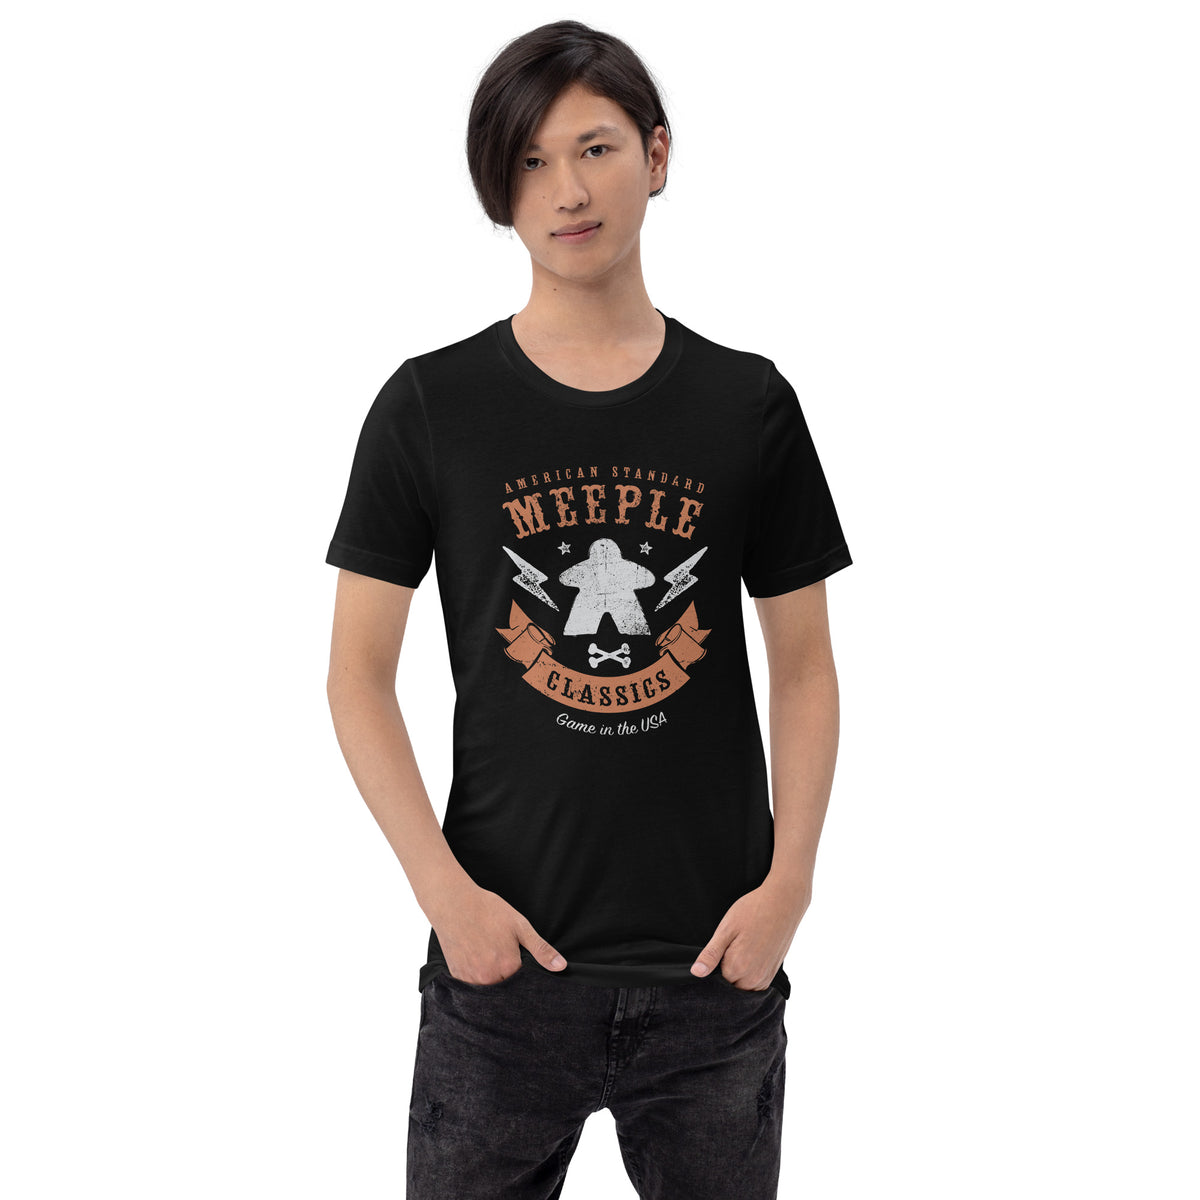 American Meeple Classics design on a black t-shirt worn by a model